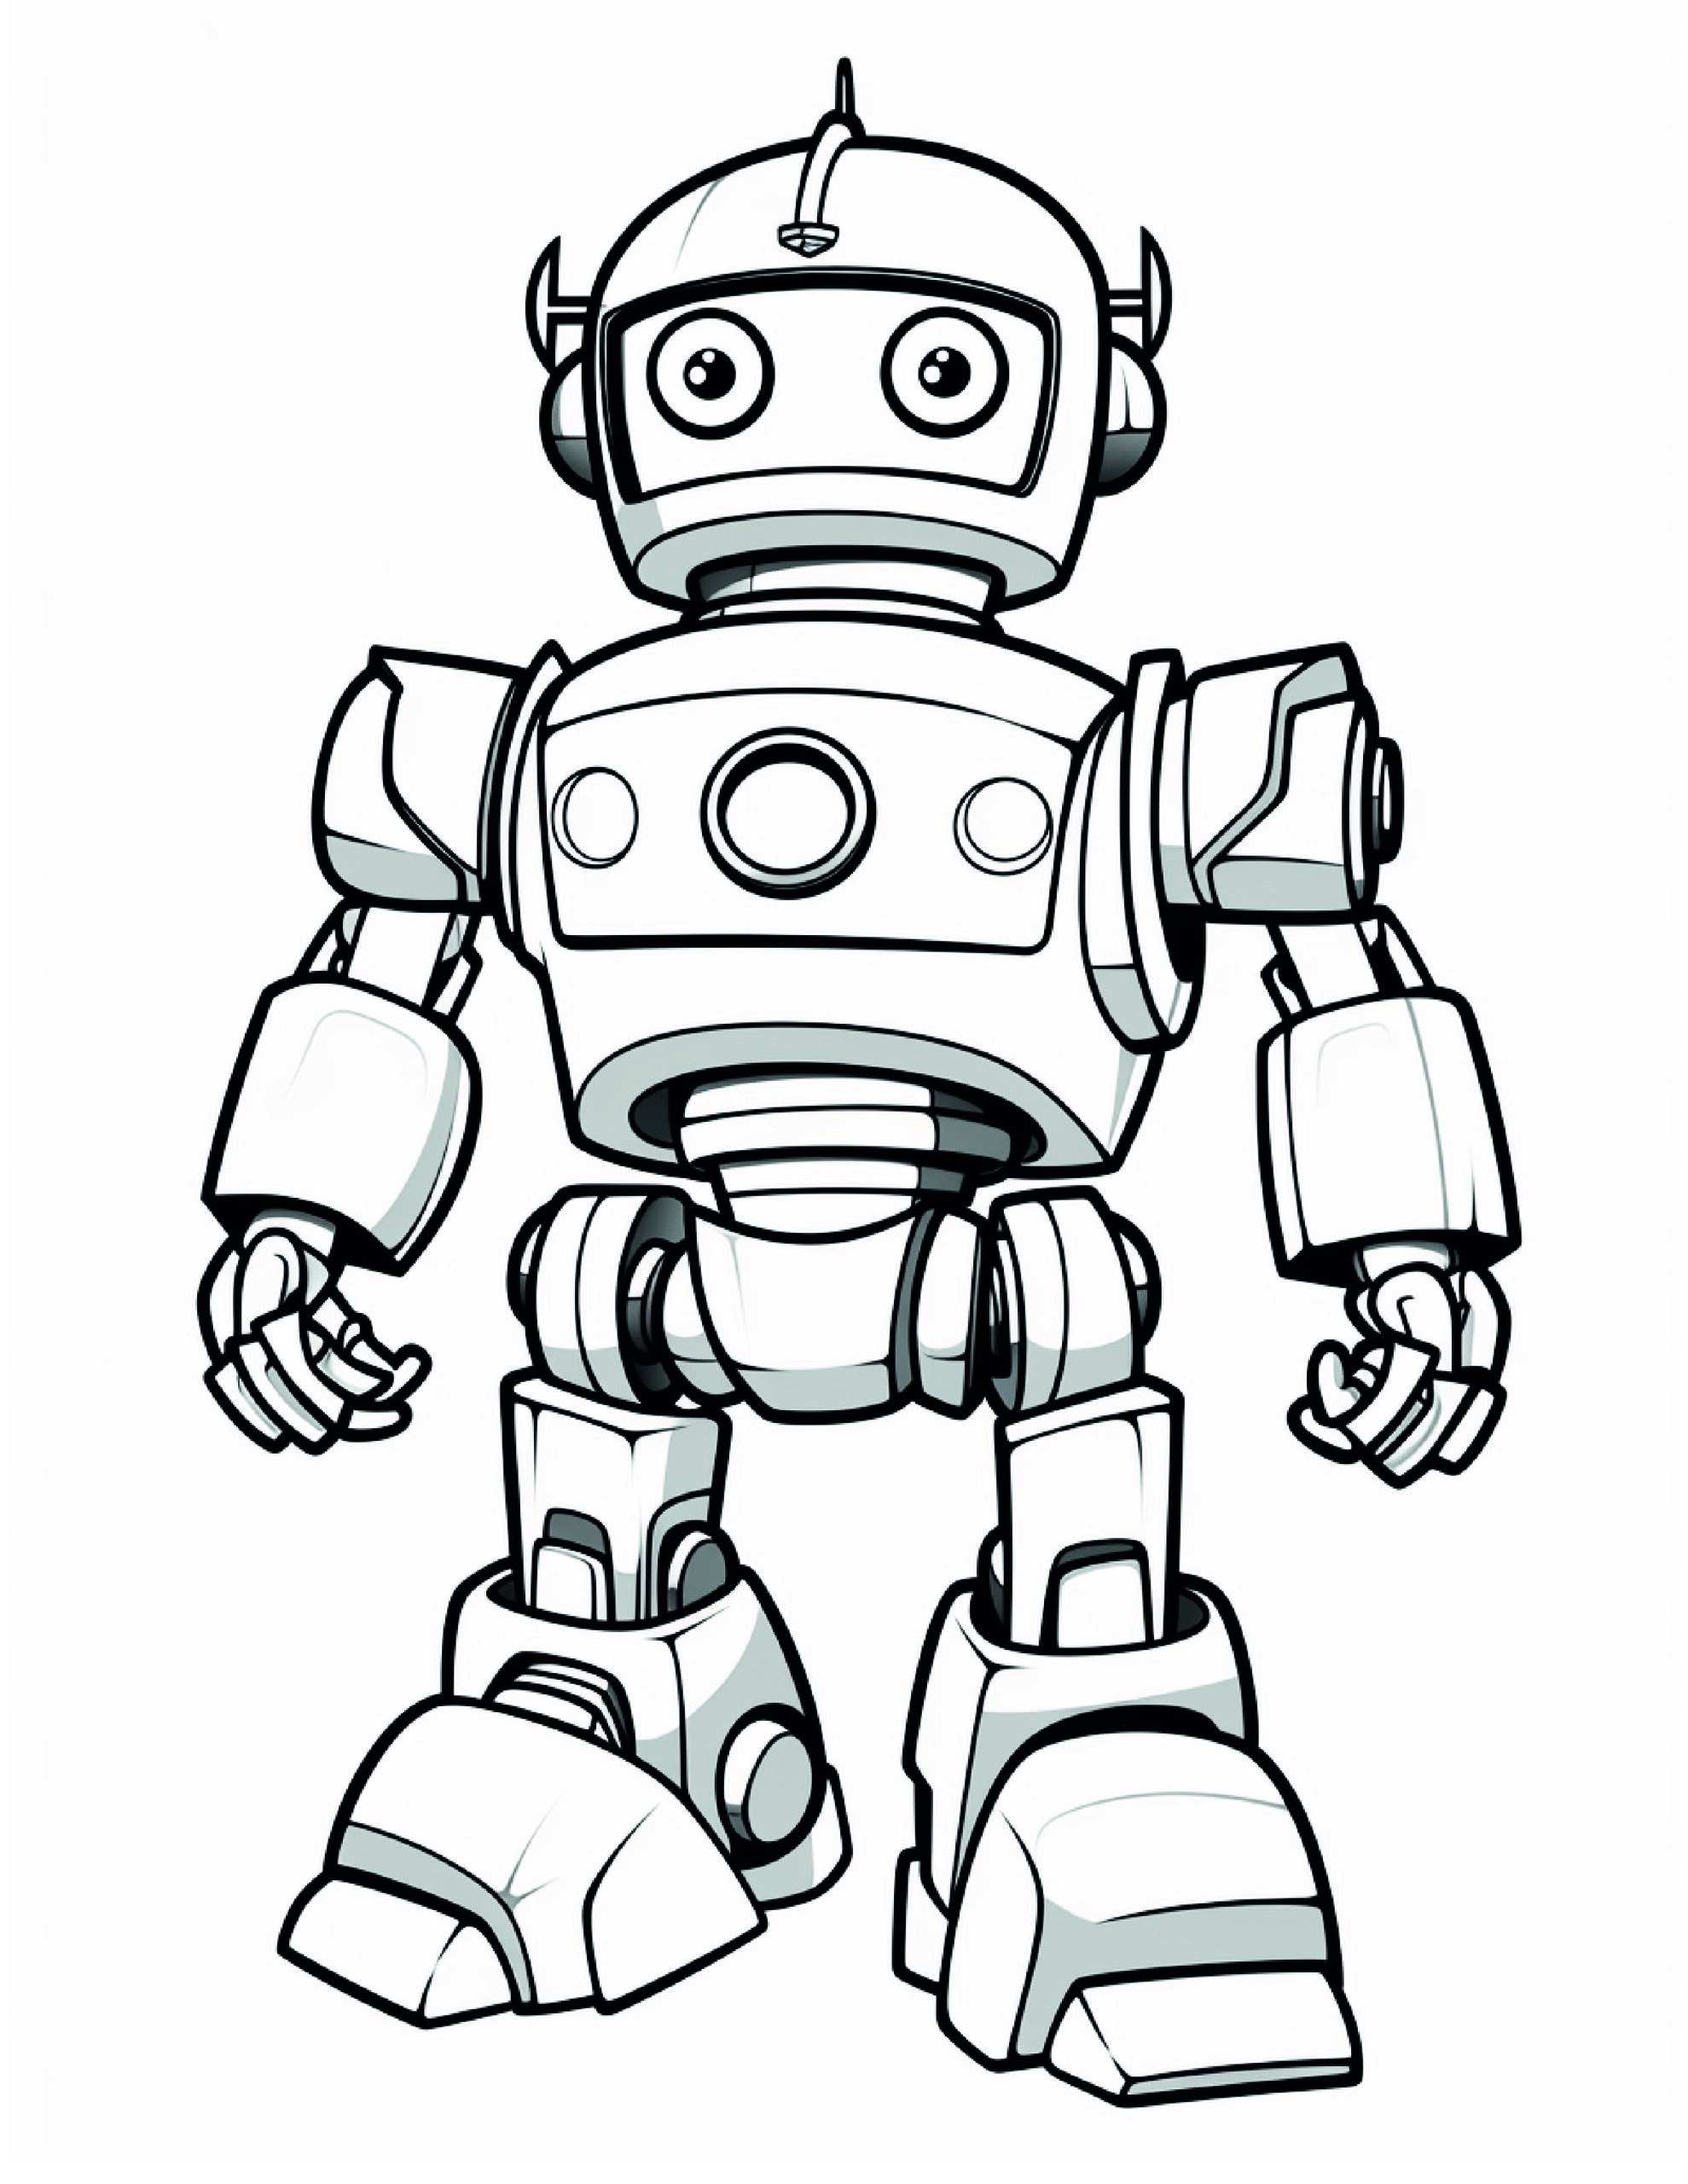 Robot Coloring Page 19 - A line drawing of a useful robot. 